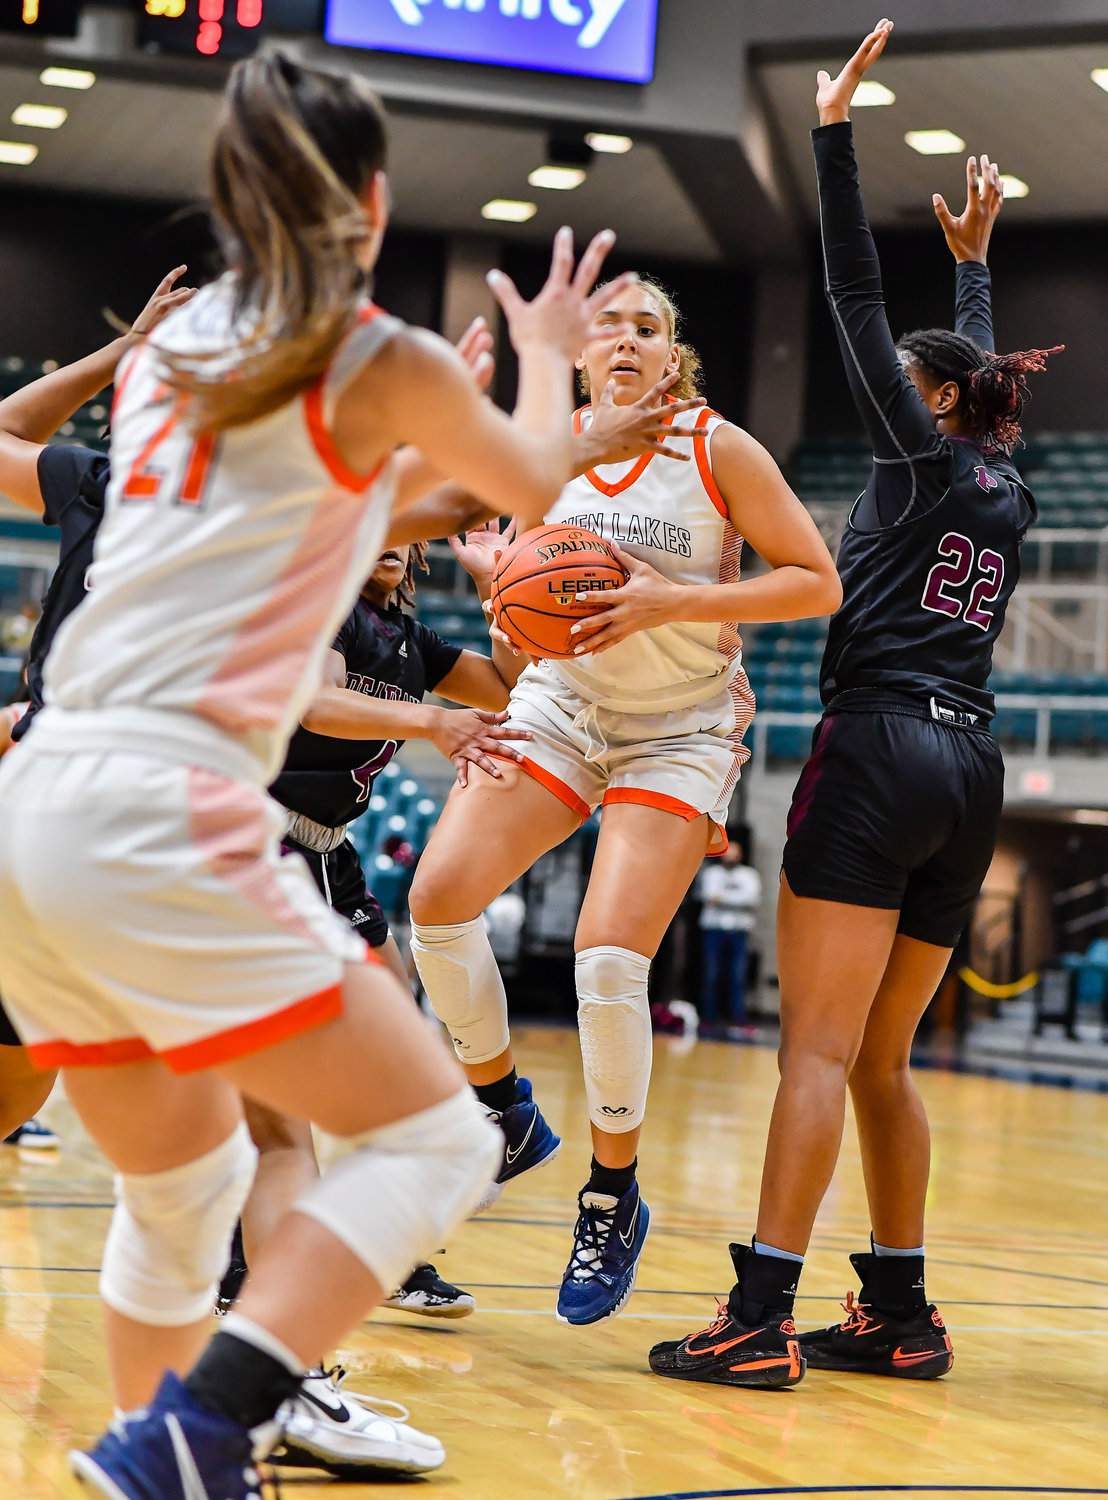 Katy Tx. Feb 25, 2022:  Seven Lakes Justice Carlton #30 drives to the basket heavily guarded by Pearland defenders during the Regional SemiFinal playoff game, Seven Lakes vs Pearland at the Merrell Center. (Photo by Mark Goodman / Katy Times)